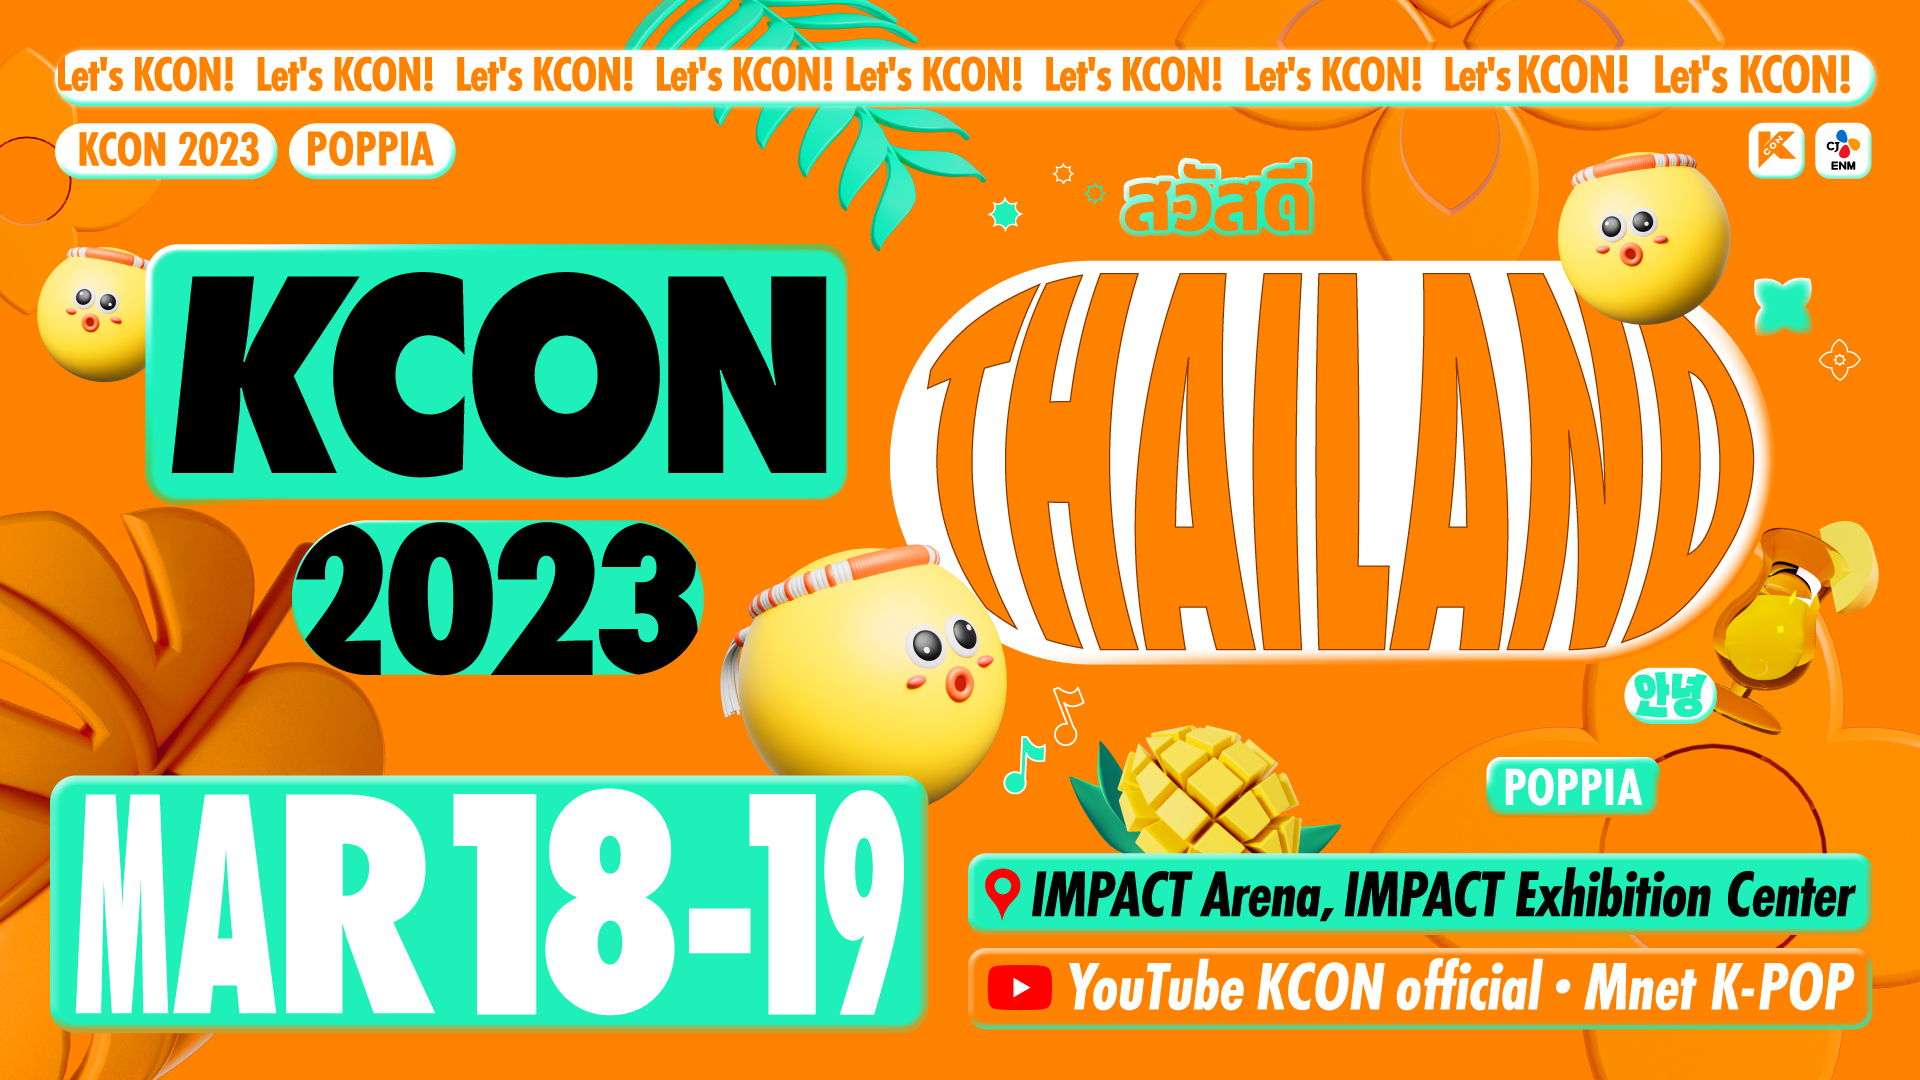 KCON official (@KCON_official) / Twitter